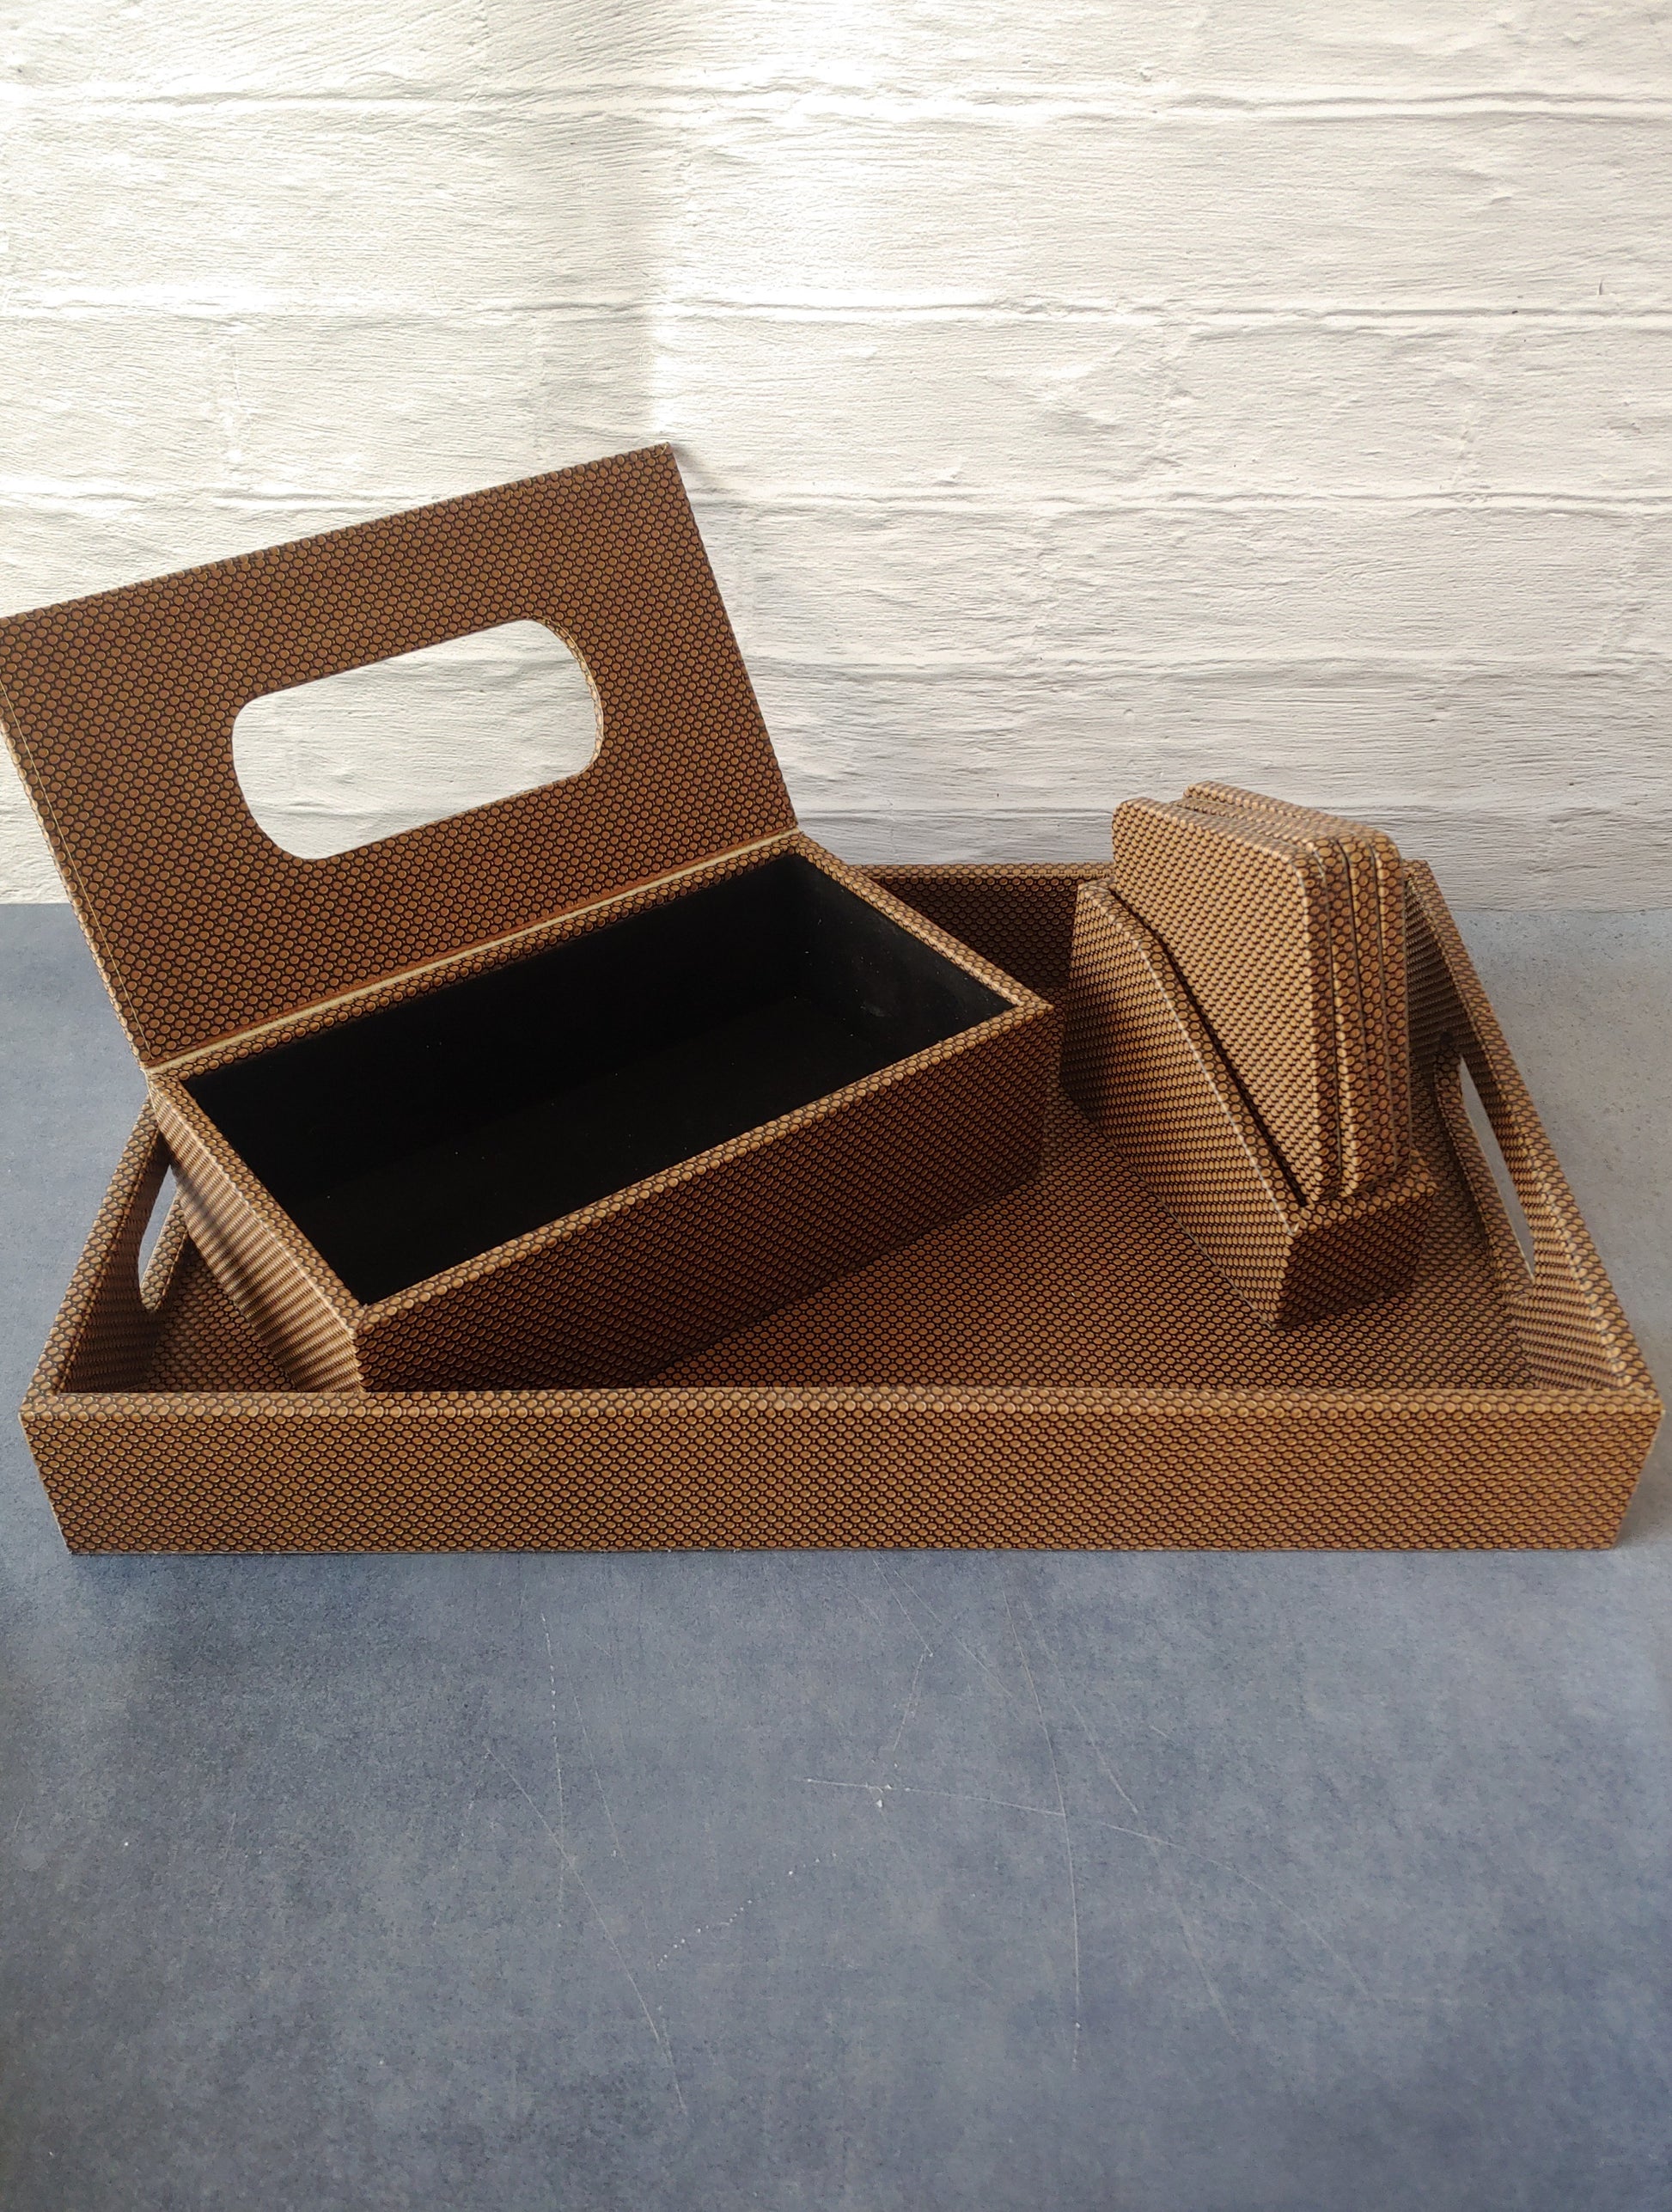 Brown HoneyComb Premium Leather Serving Tray along with tissue holder and coasters